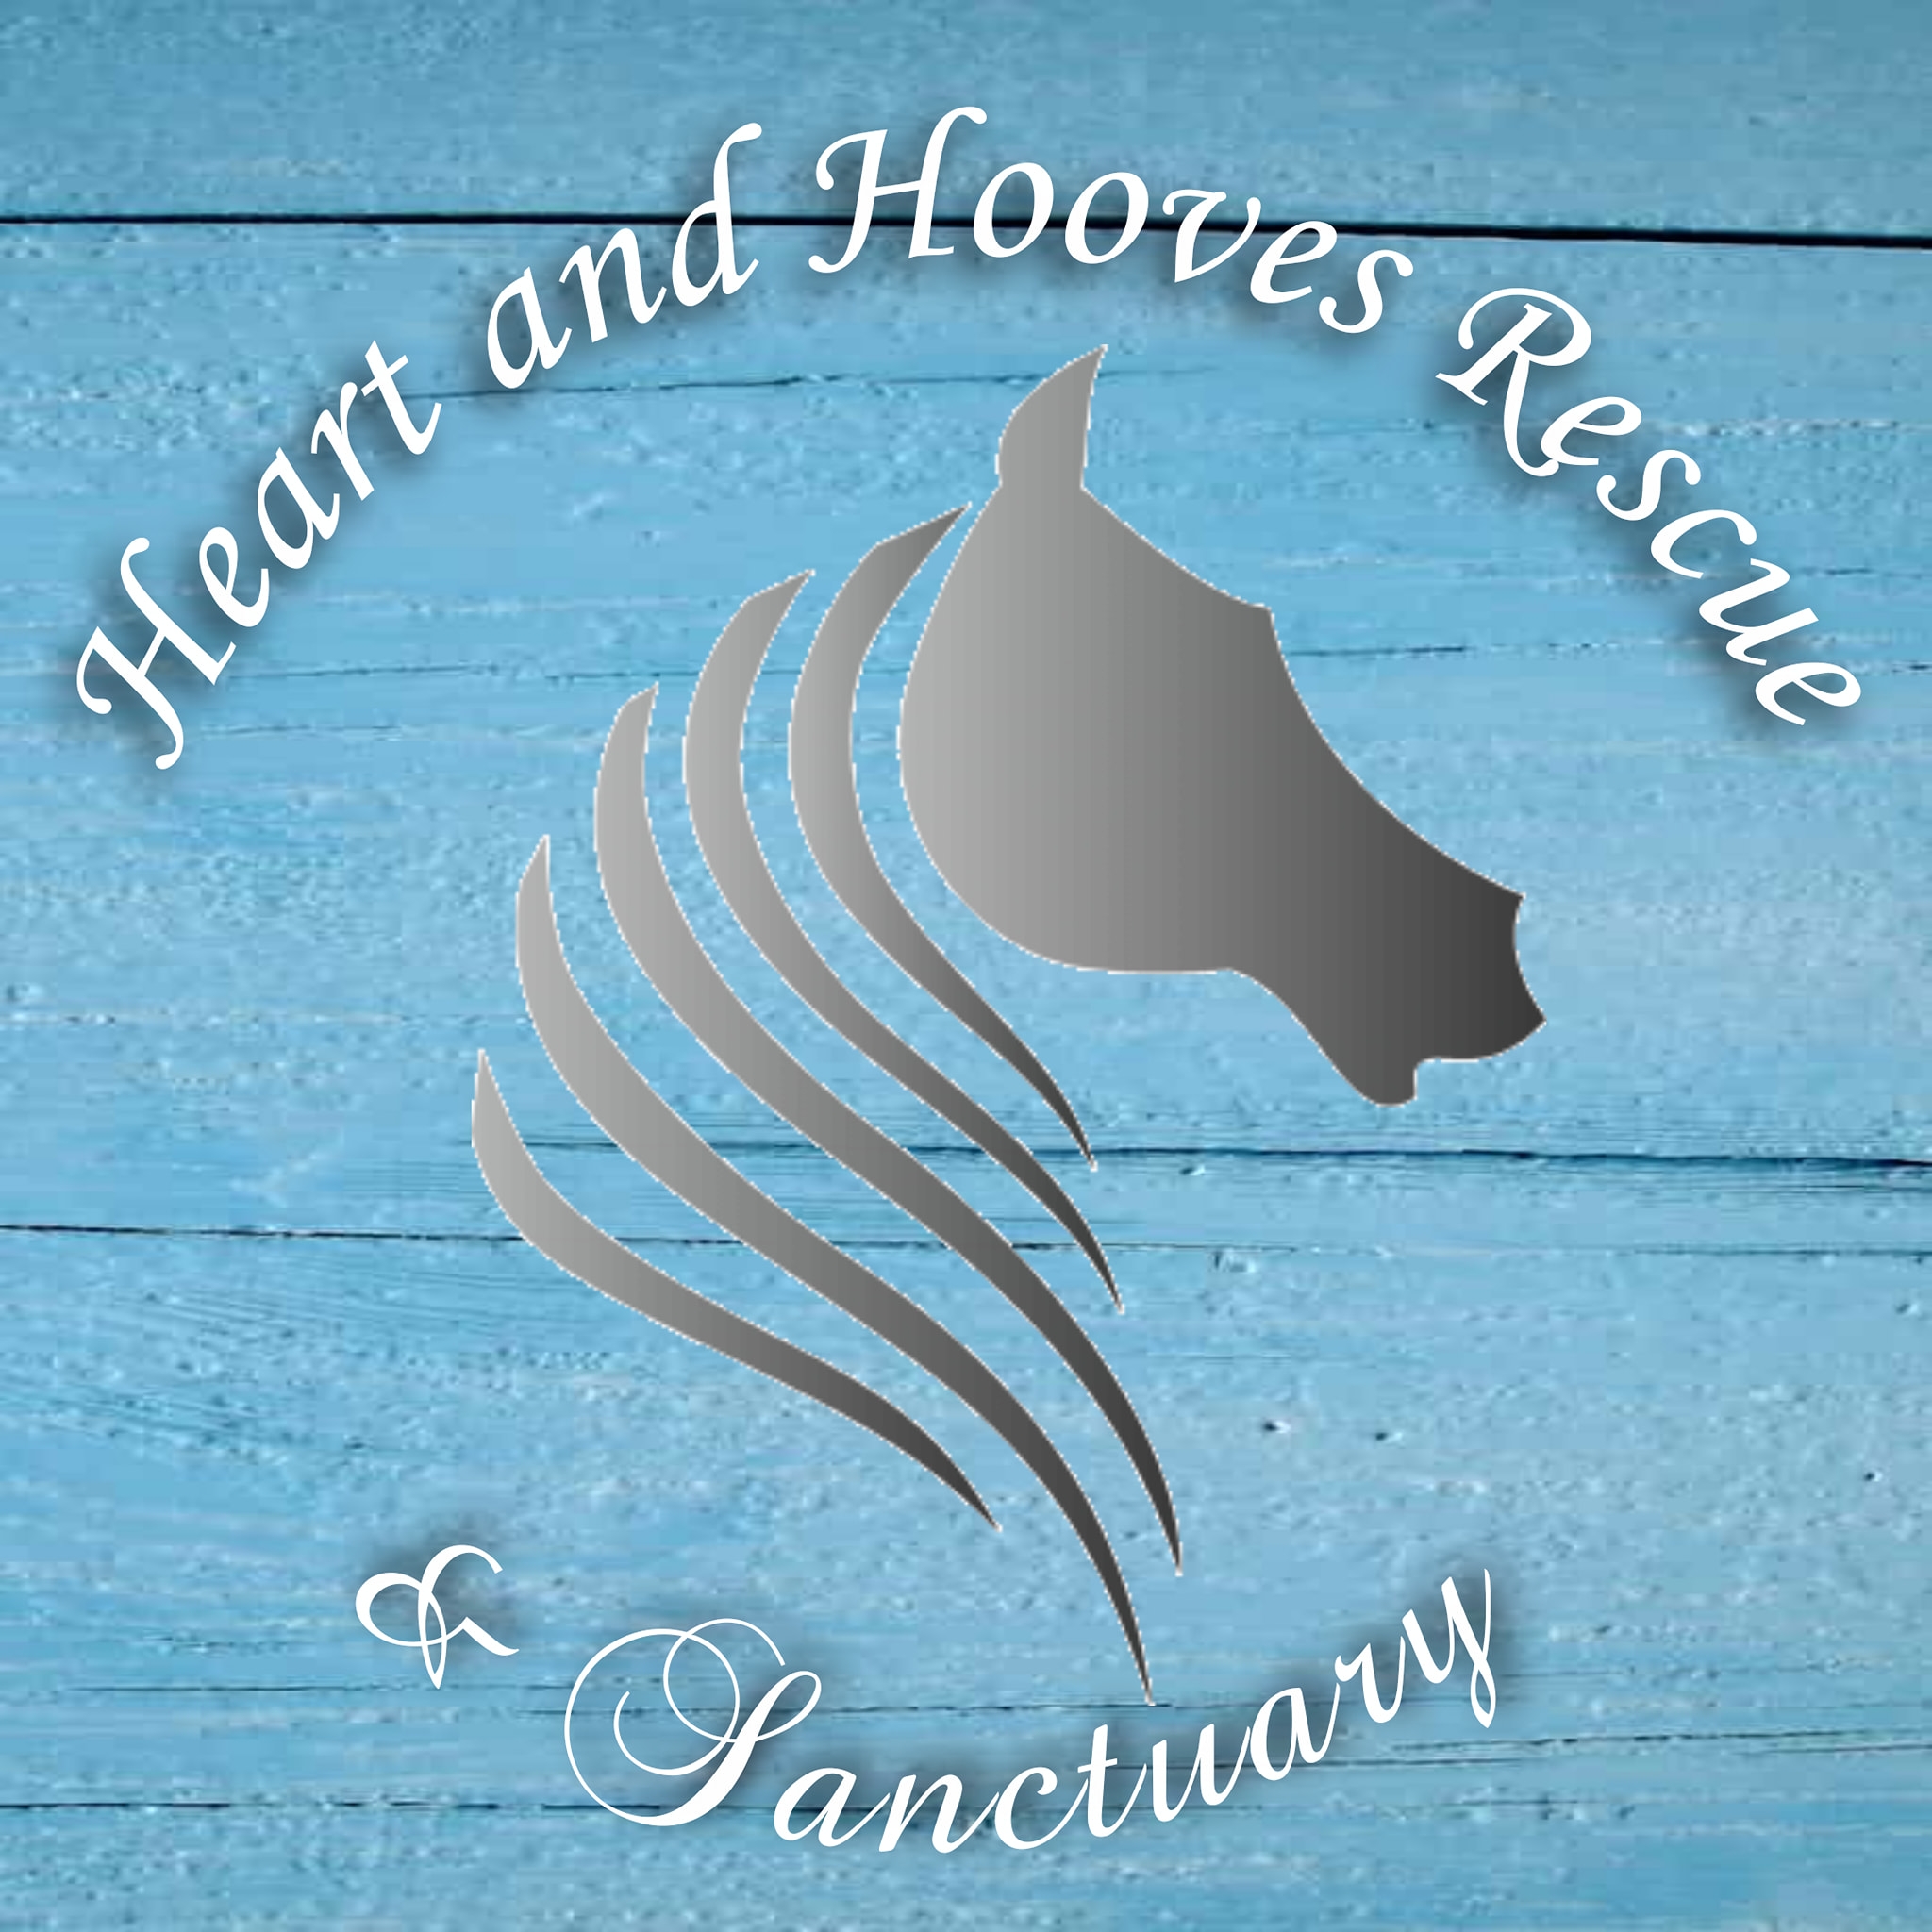 Heart and Hooves Rescue and Sanctuary